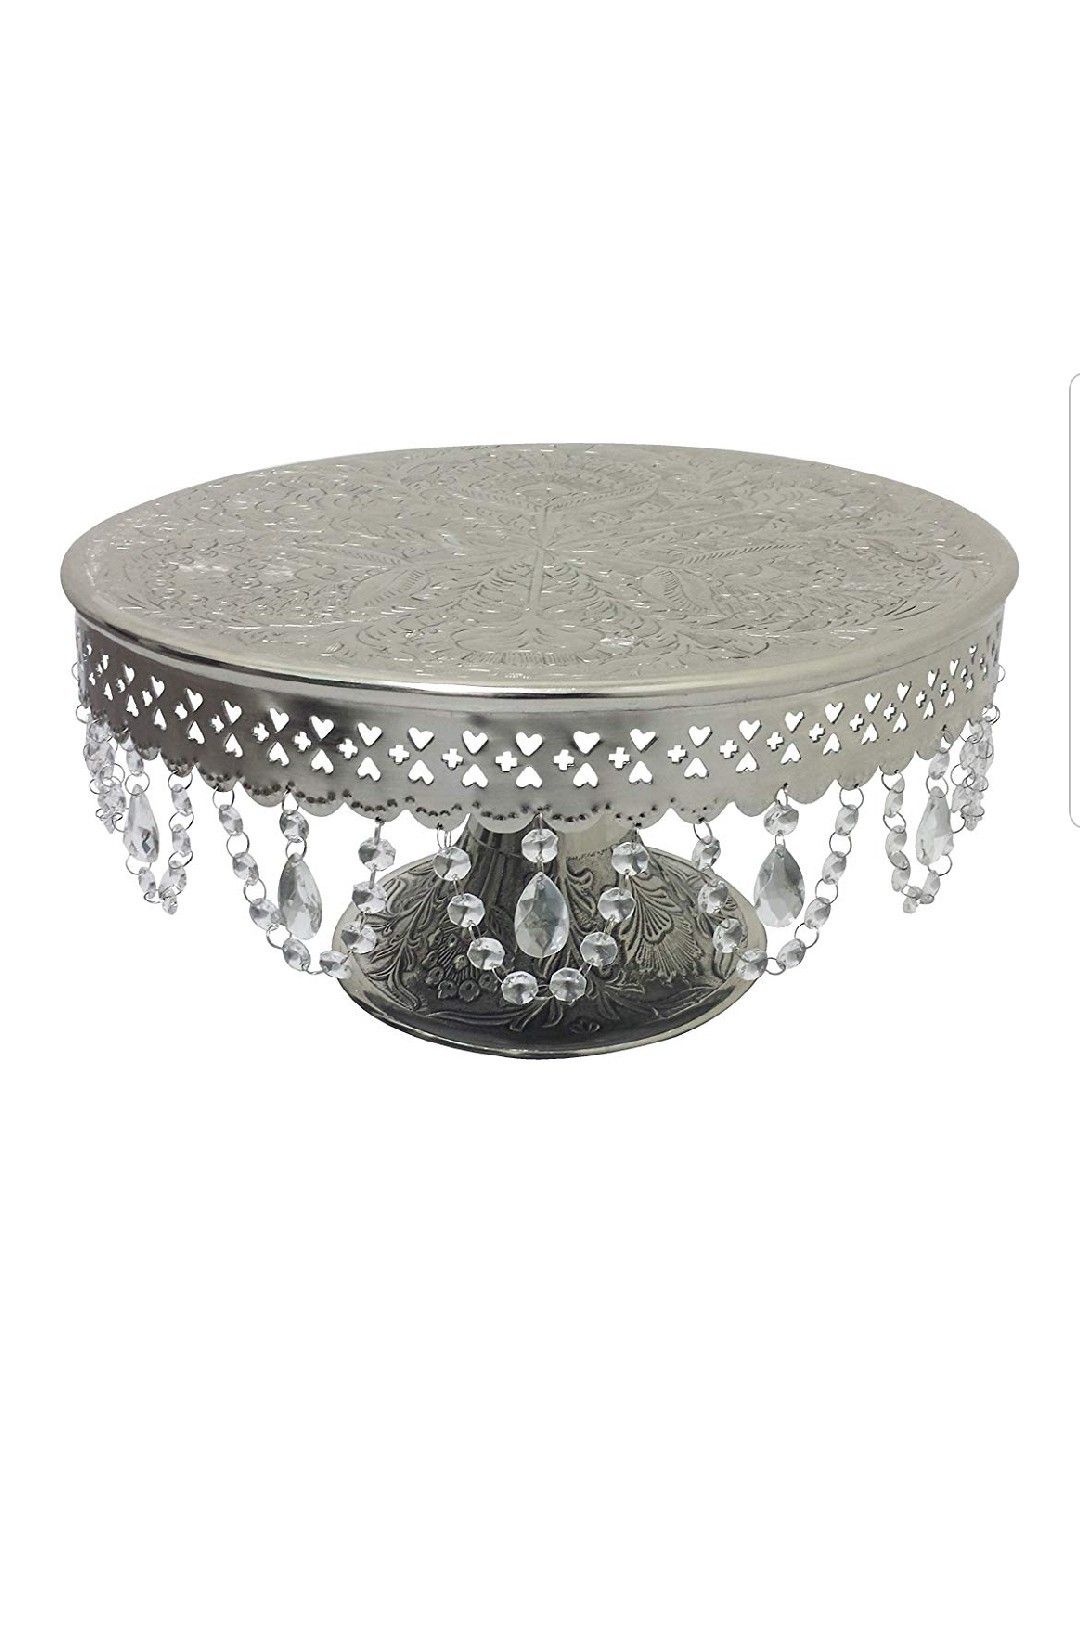 Wedding Cake Stand Round Pedestal Silver finish 16" with Clear Hanging Glass Crystals